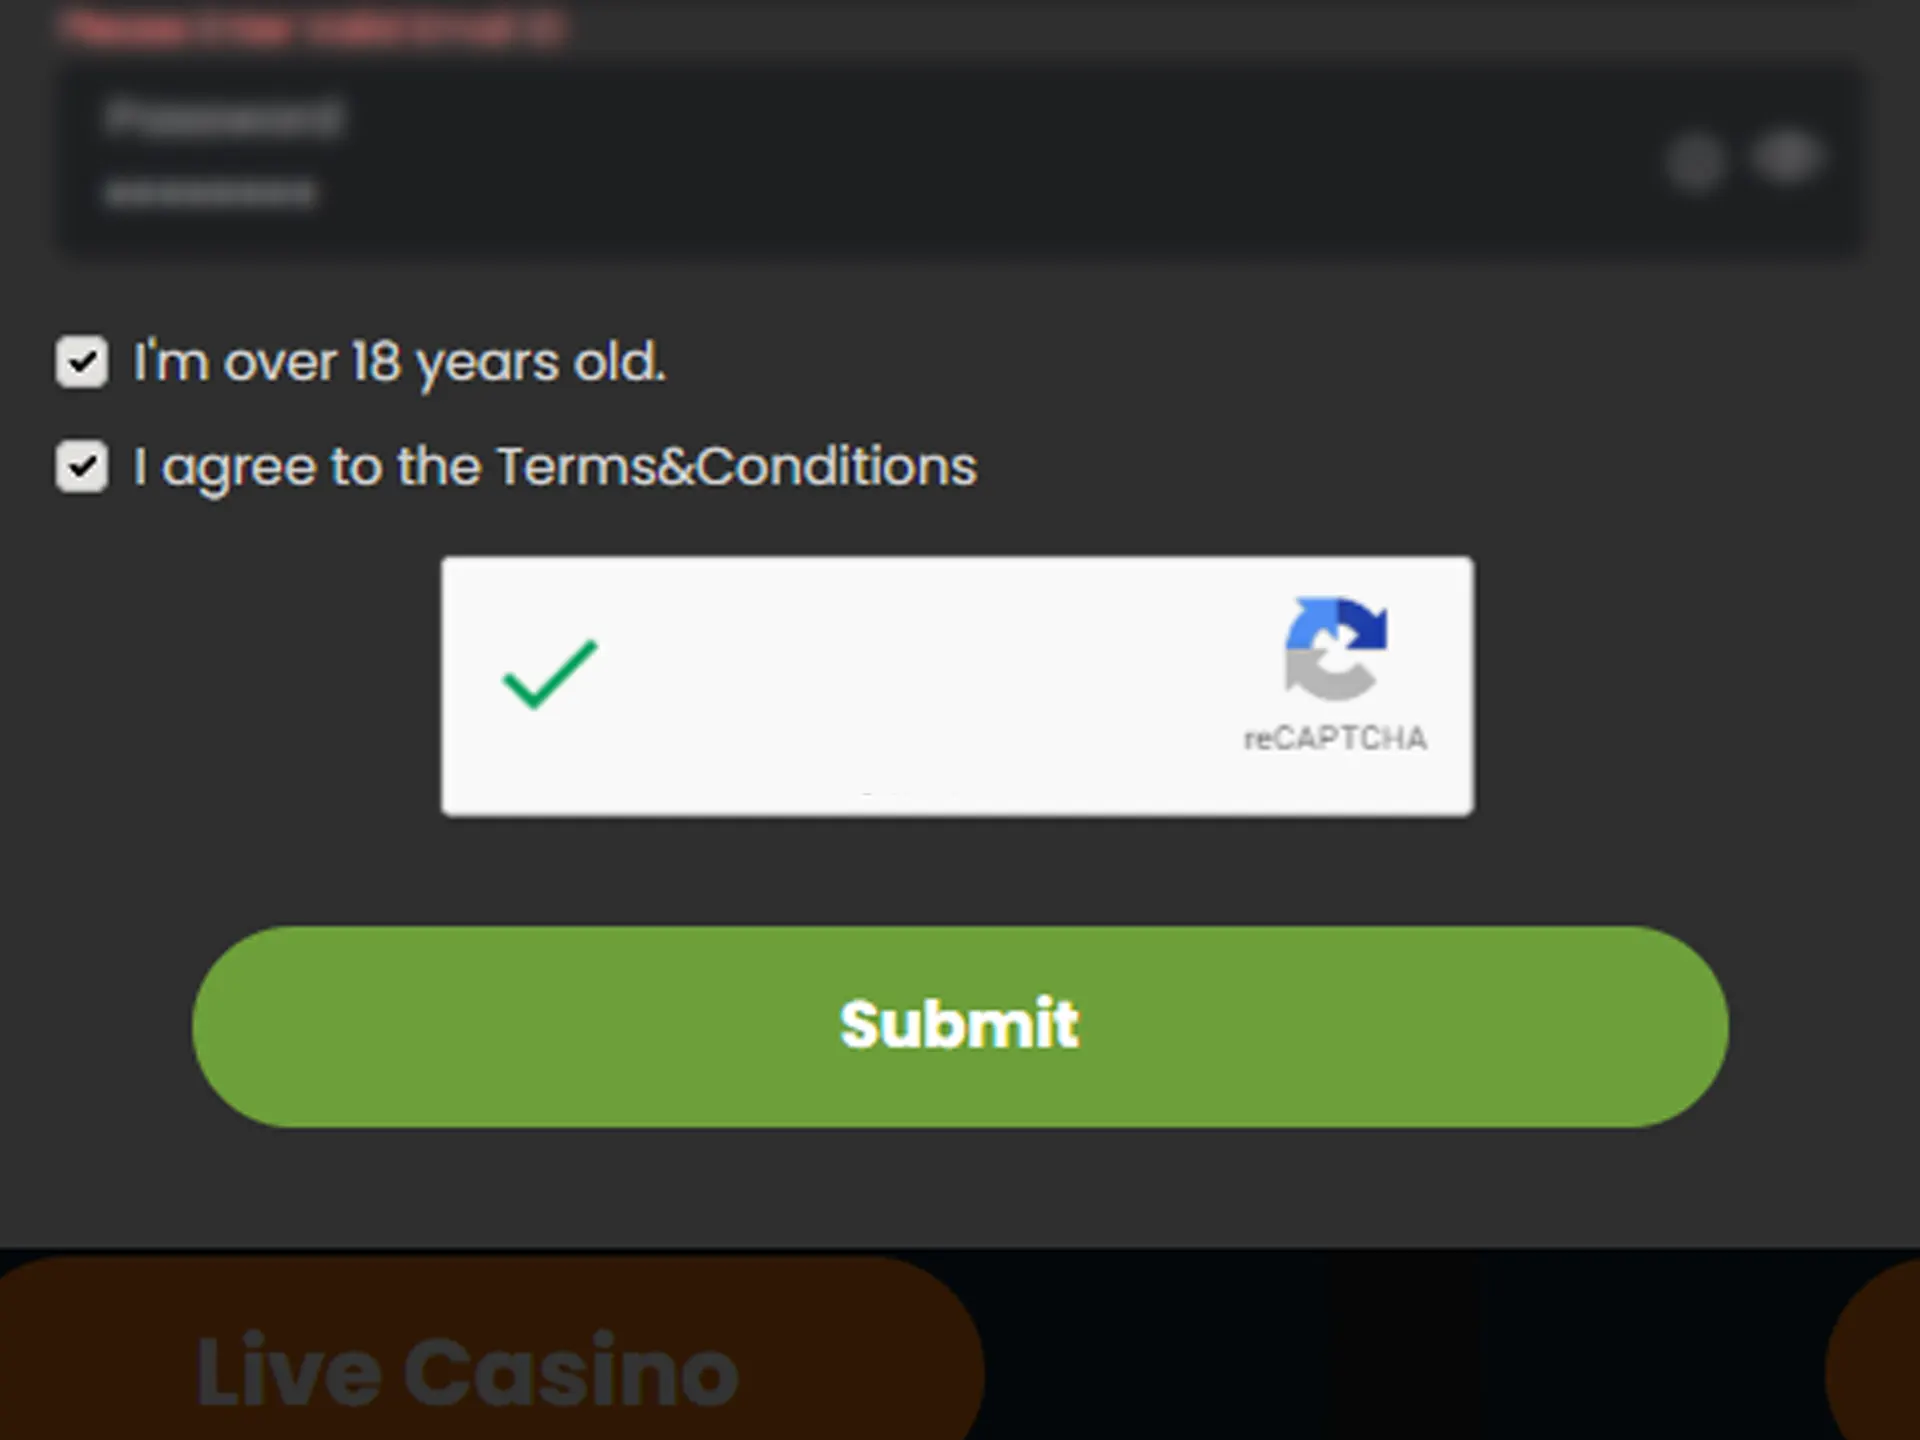 Mark terms and conditions option.